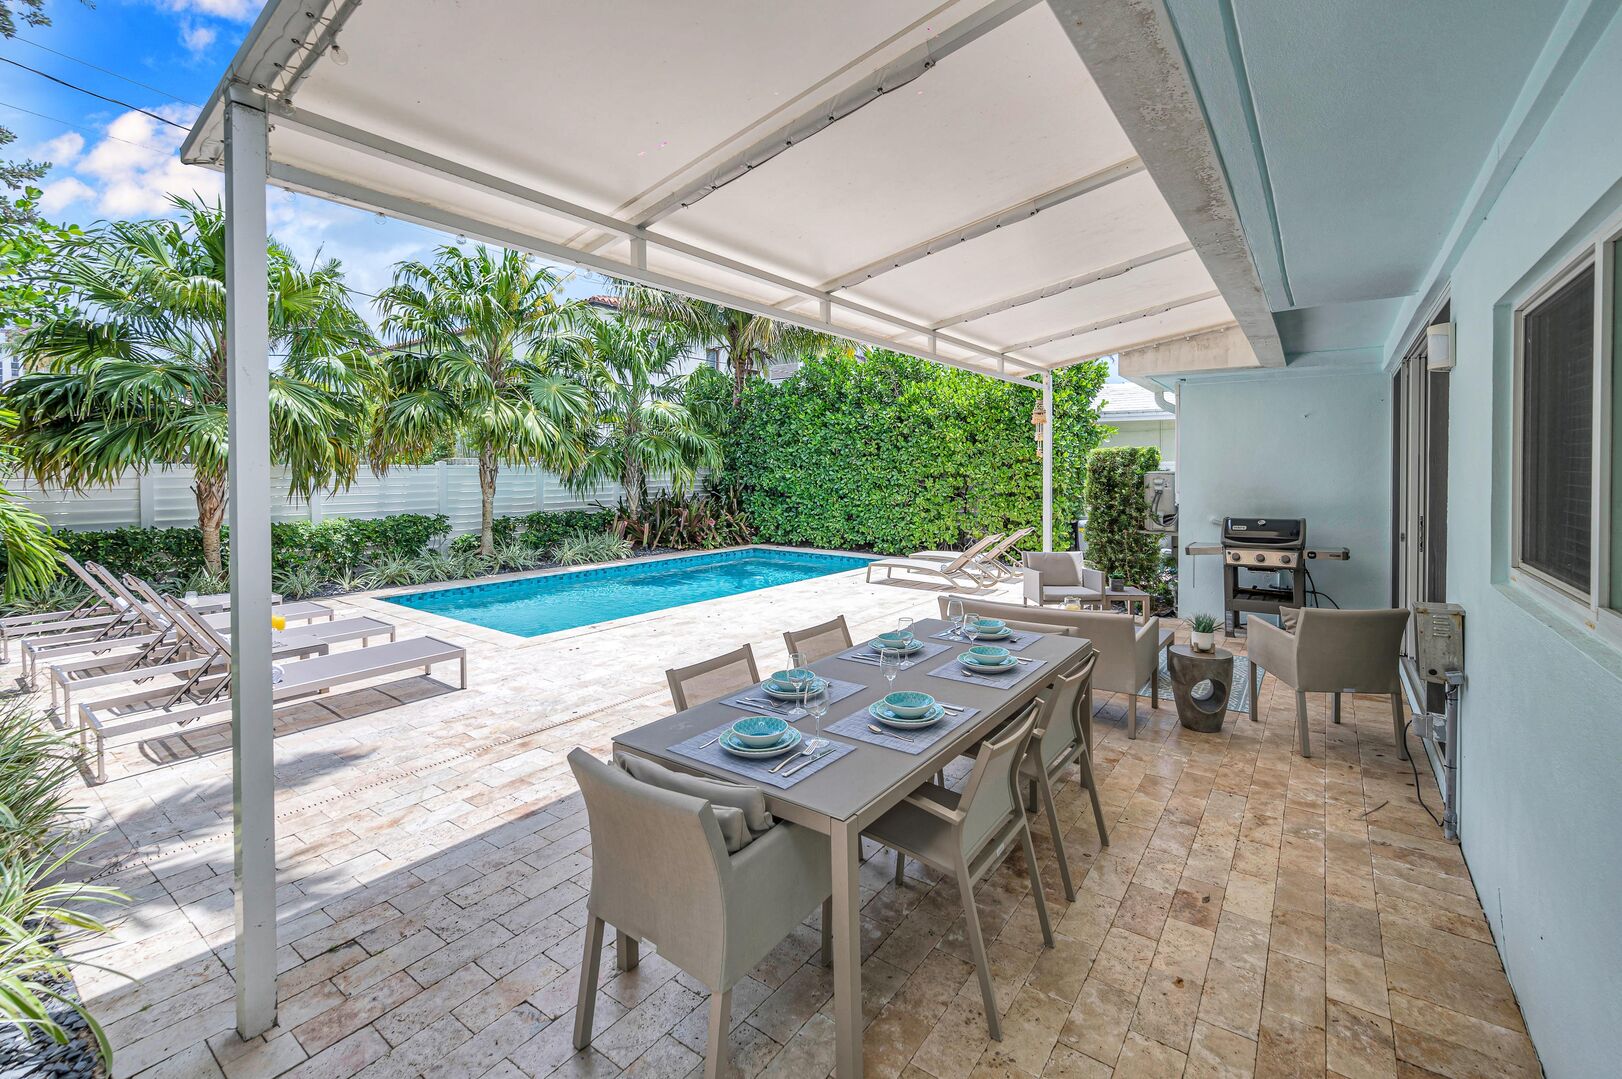 Dine in style and bask in the warmth of our heated pool, as our outdoor seating for six creates the ideal setting for memorable al fresco gatherings and leisurely meals.